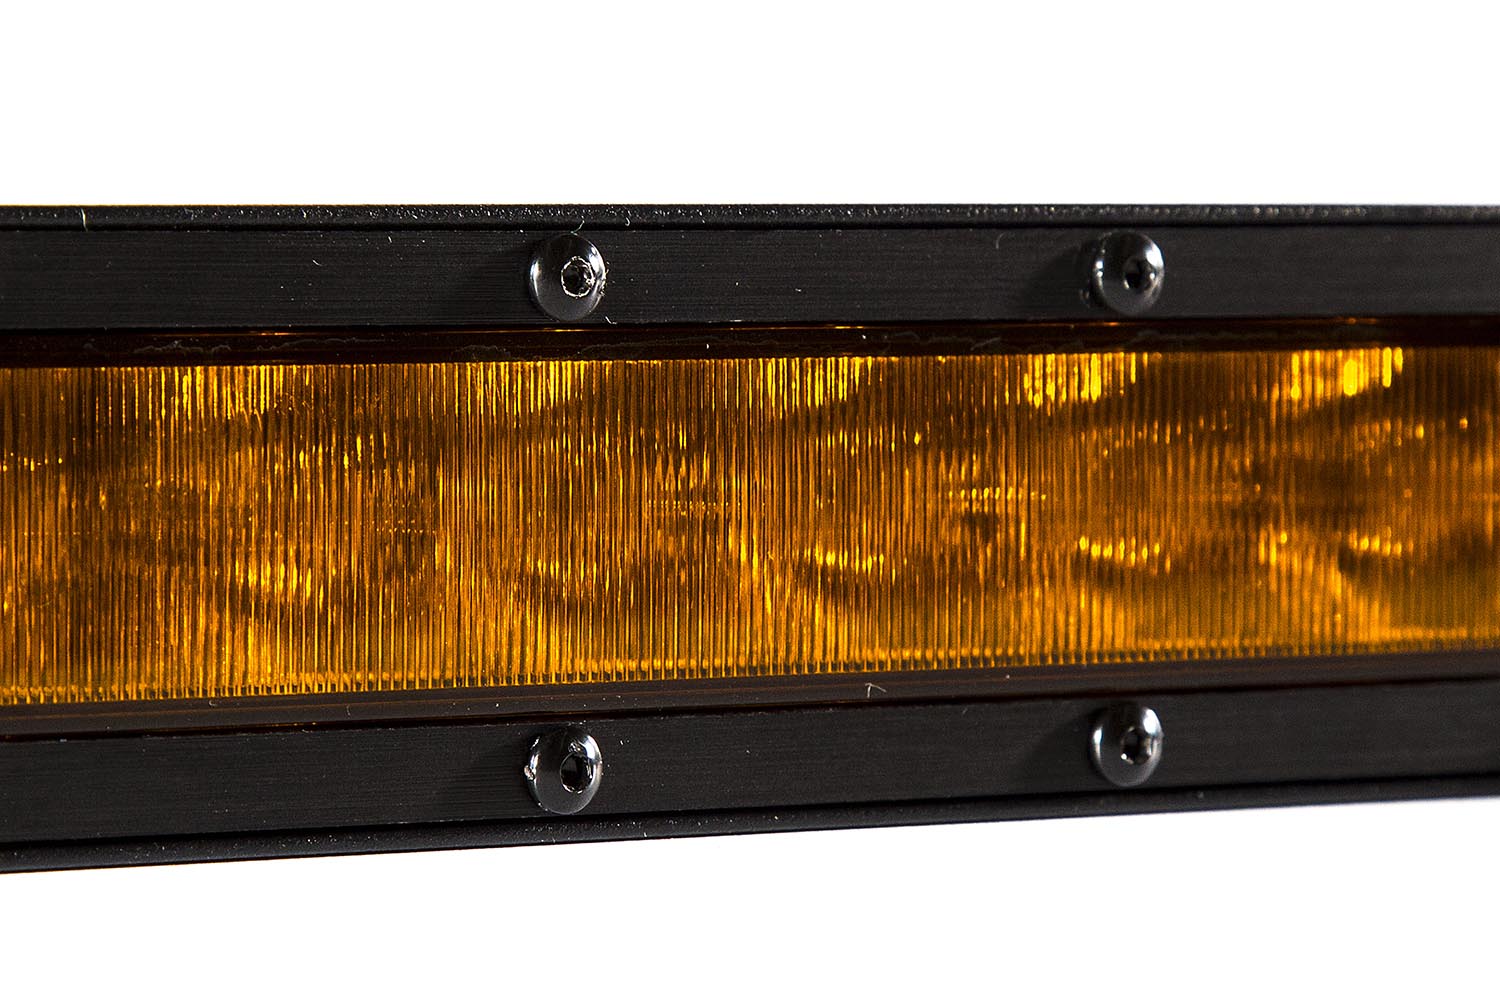 18 Inch LED Light Bar  Single Row Straight Amber Wide Each Stage Series Diode Dynamics